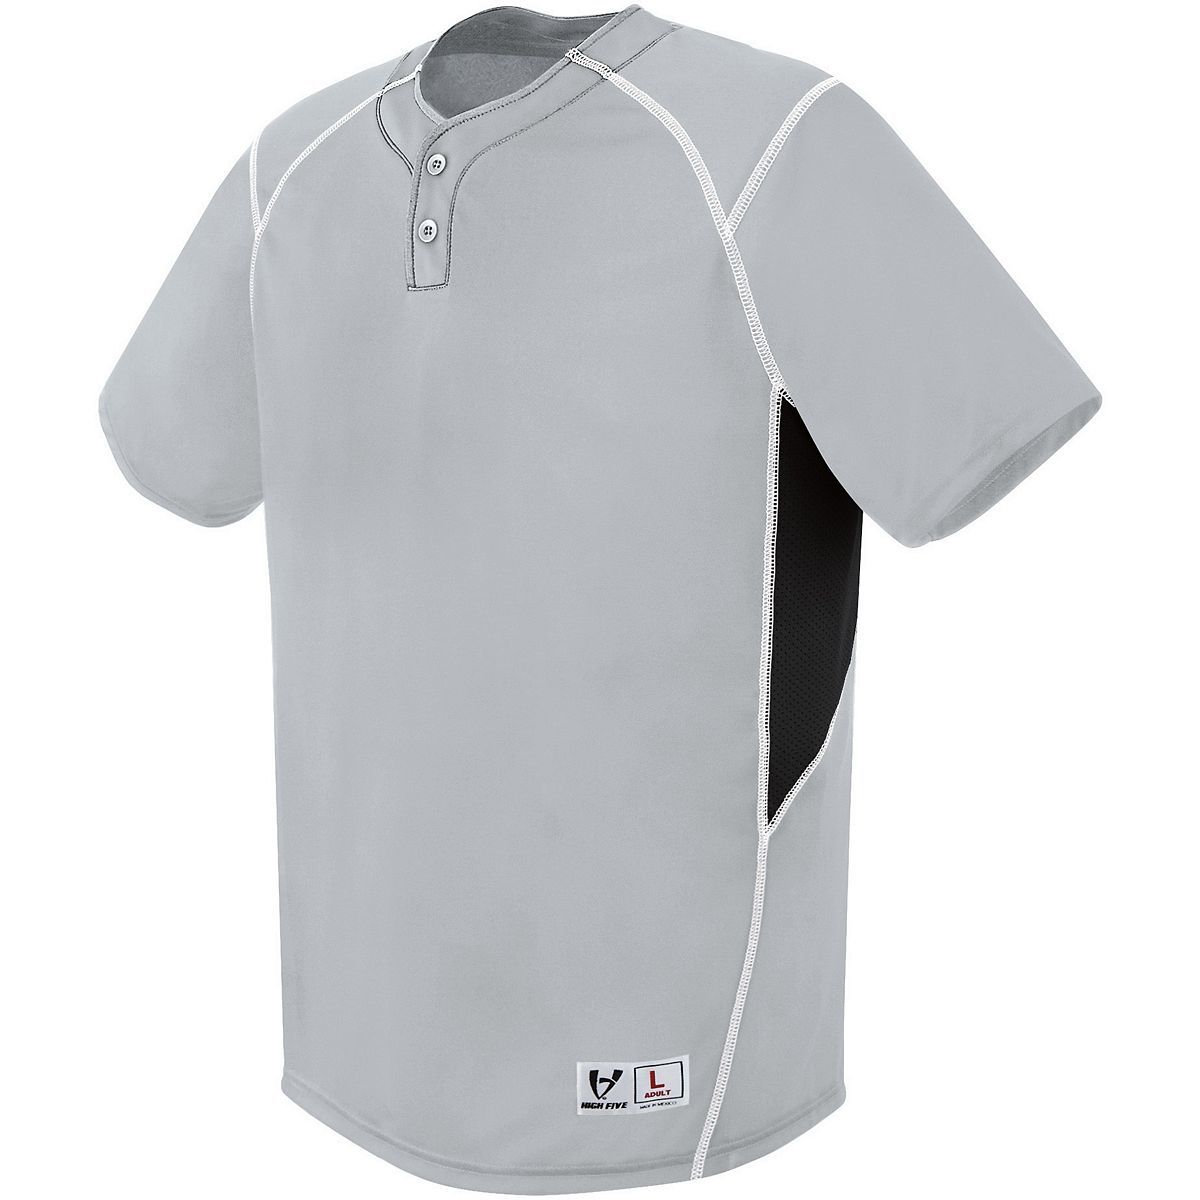 Augusta Sportswear Bandit Two-Button Jersey in Silver Grey/Black/White  -Part of the Adult, Adult-Jersey, Augusta-Products, Baseball, Shirts, All-Sports, All-Sports-1 product lines at KanaleyCreations.com